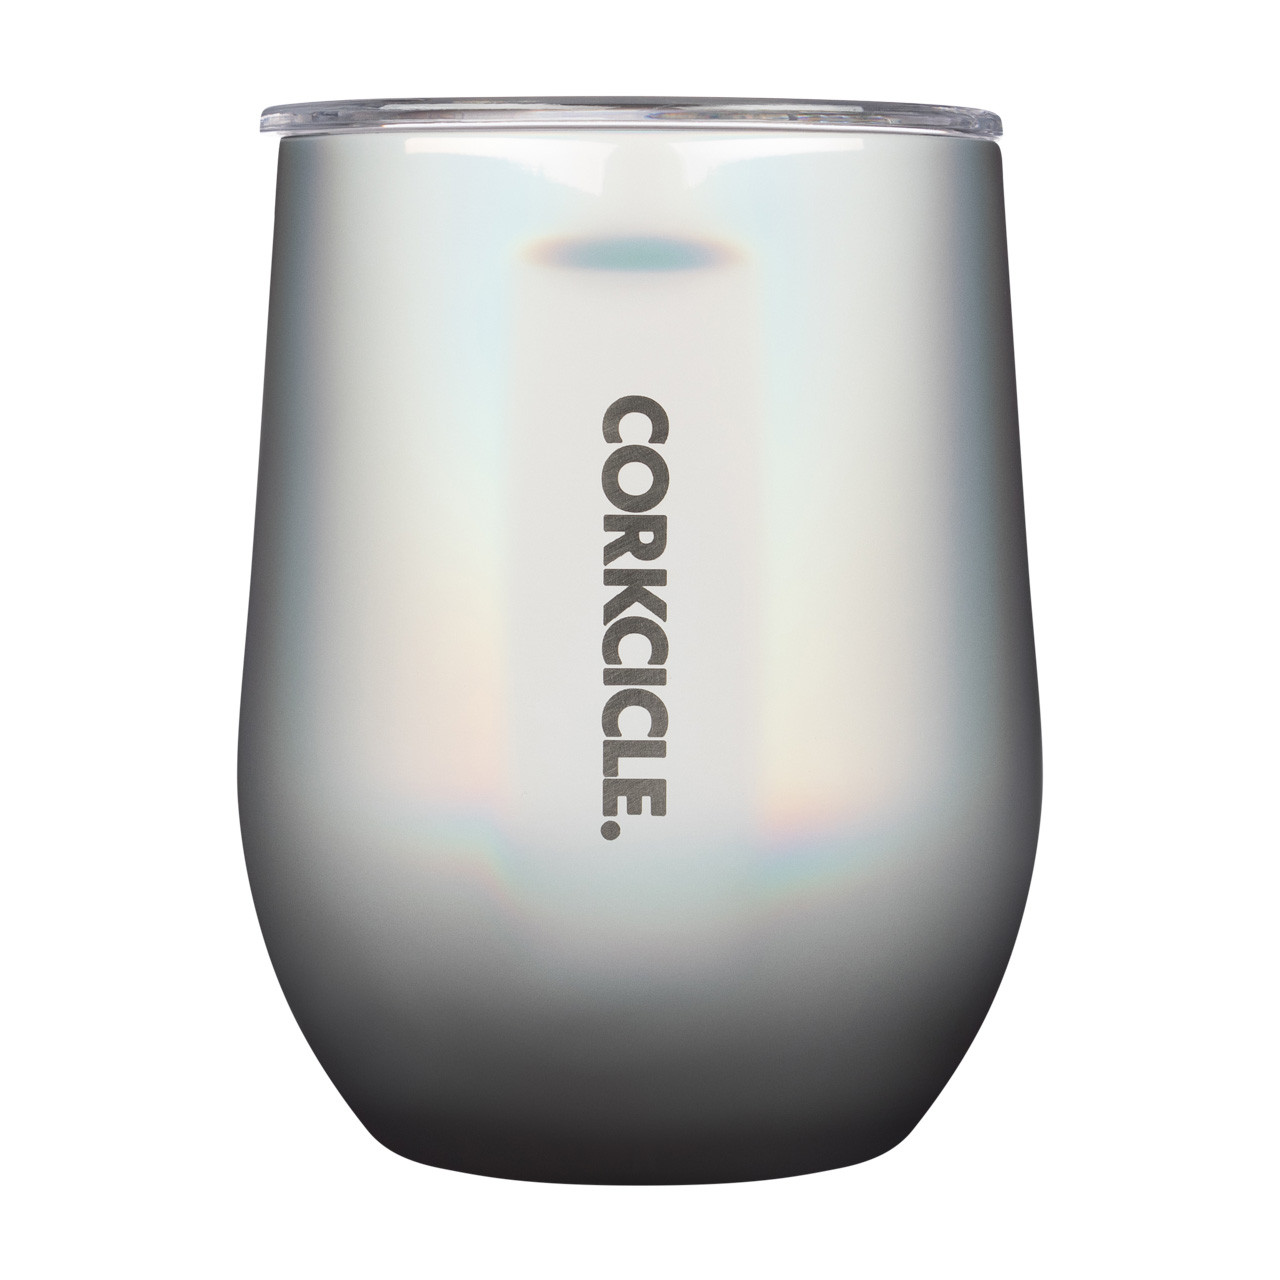 https://cdn11.bigcommerce.com/s-6zwhmb4rdr/images/stencil/1280x1280/products/66232/187390/the-lamp-stand-corkcicle-stemless-12oz-prismatic-2312ep-2__96691.1631874821.jpg?c=1